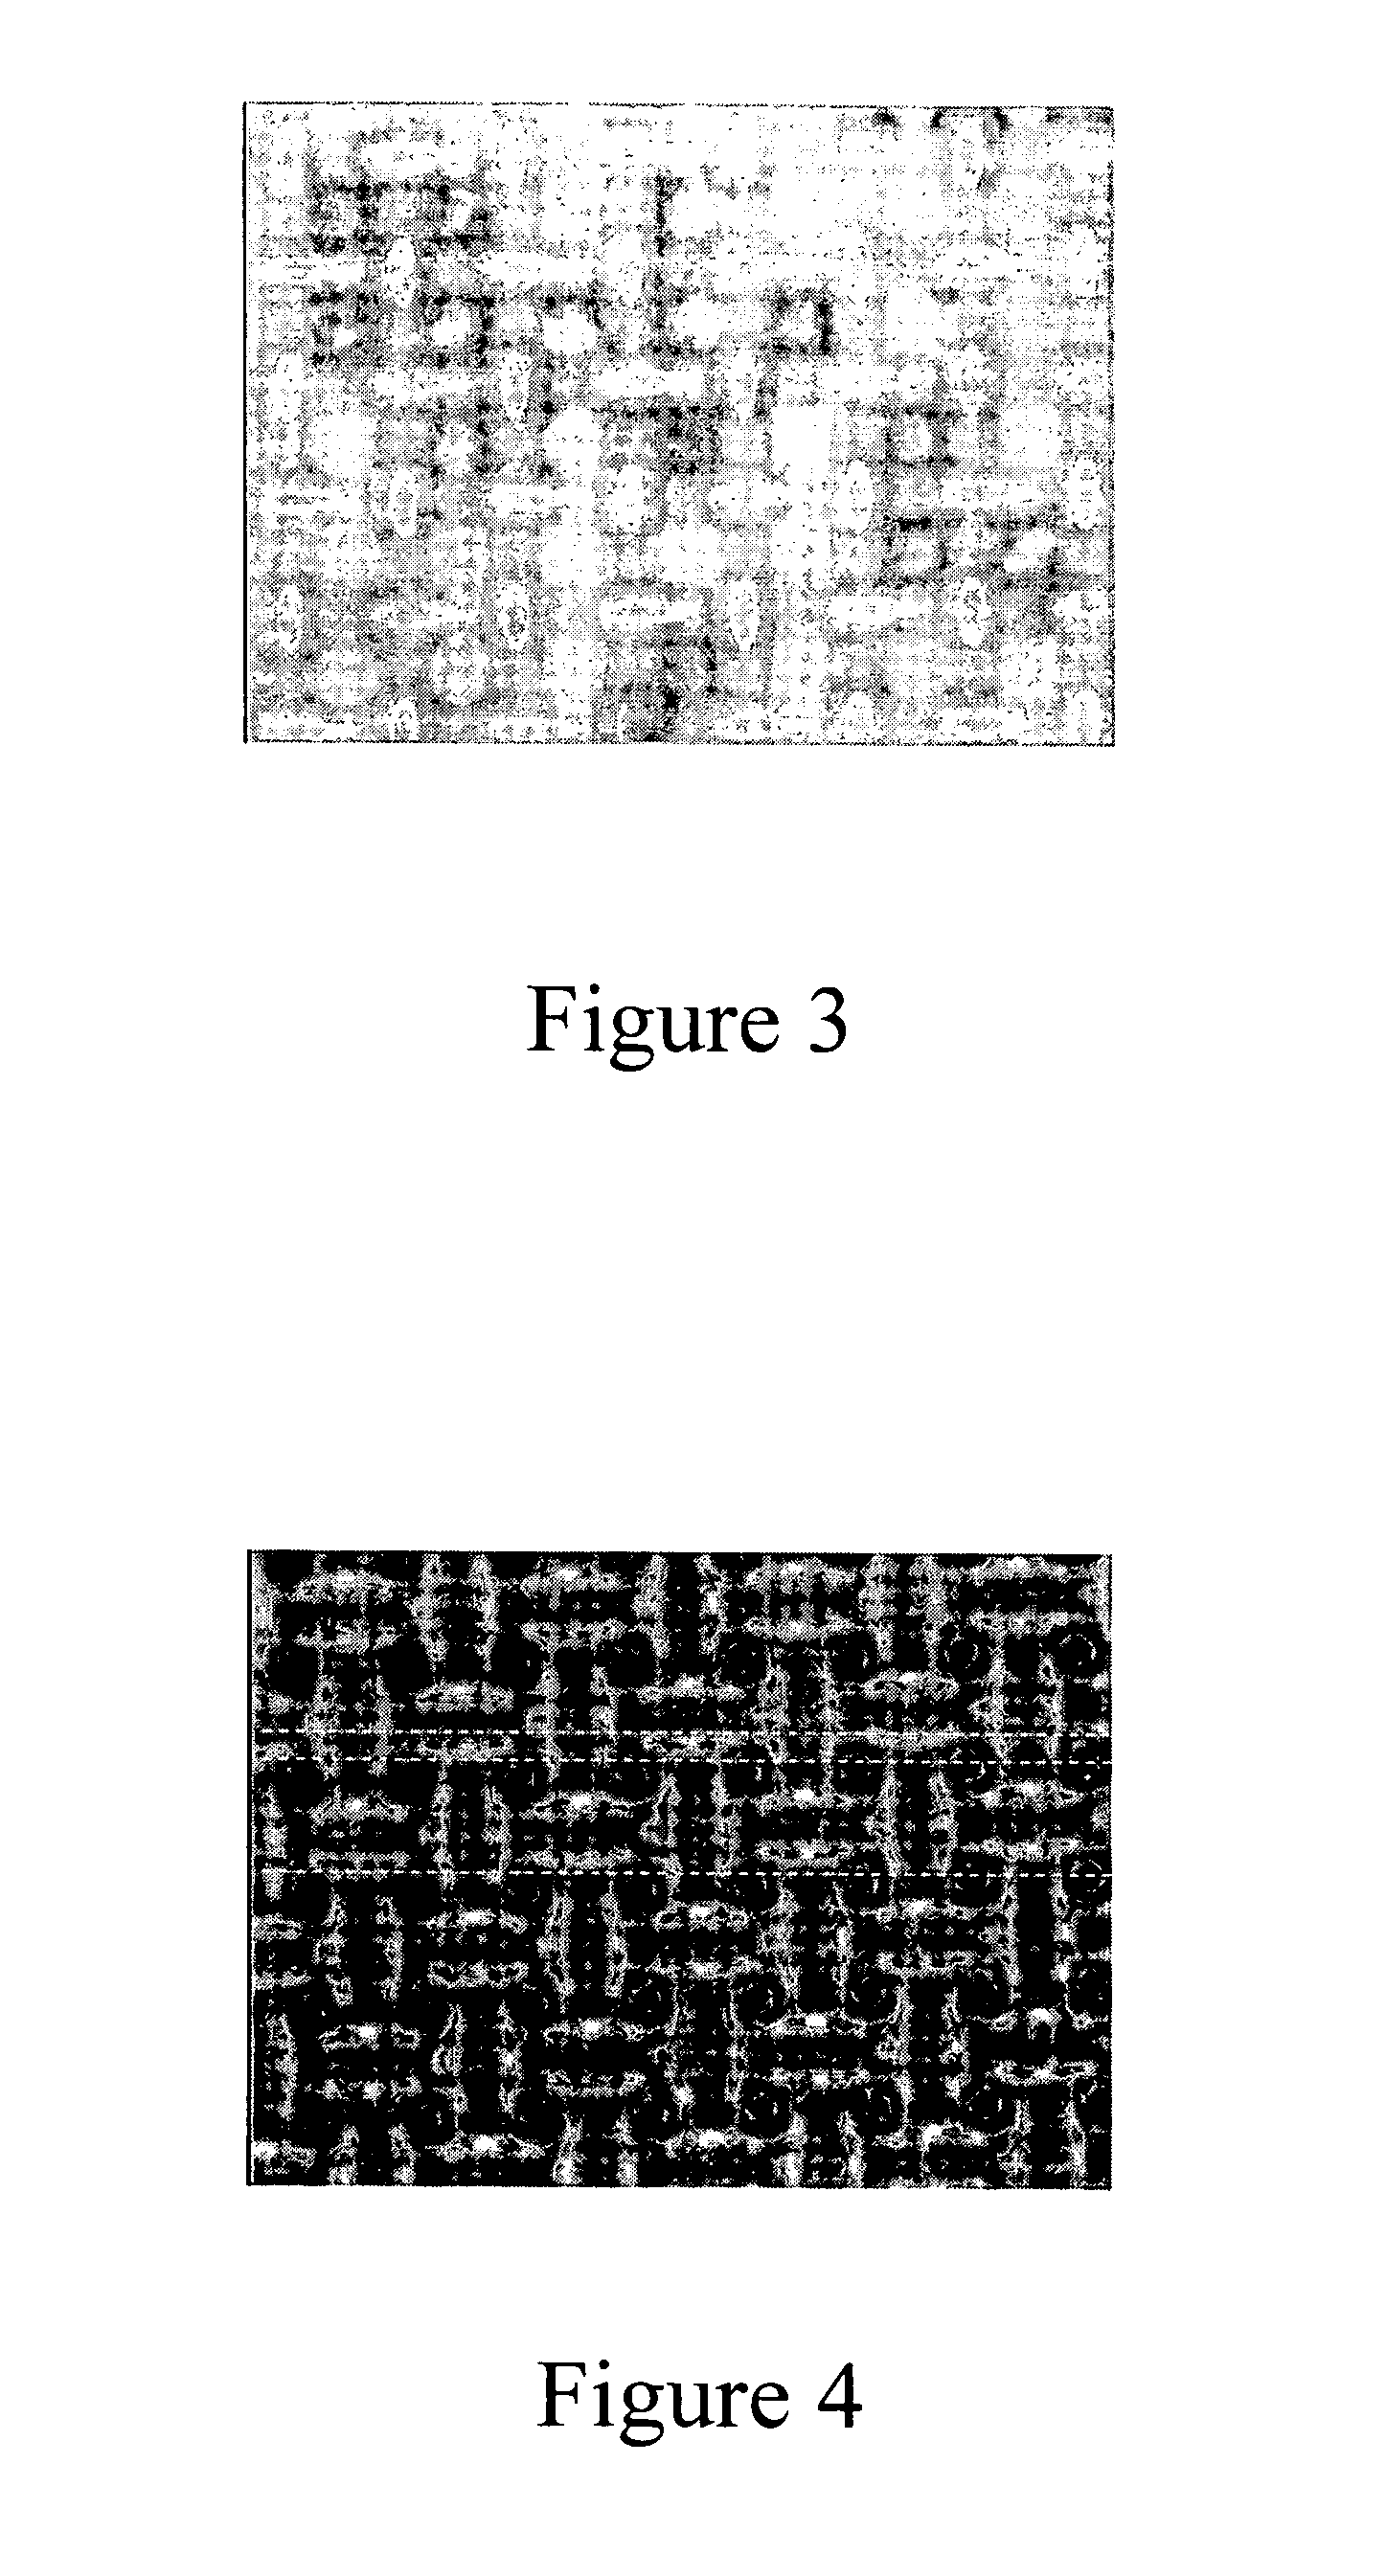 Transdermal delivery system for dried particulate or lyophilized peptides and polypeptides